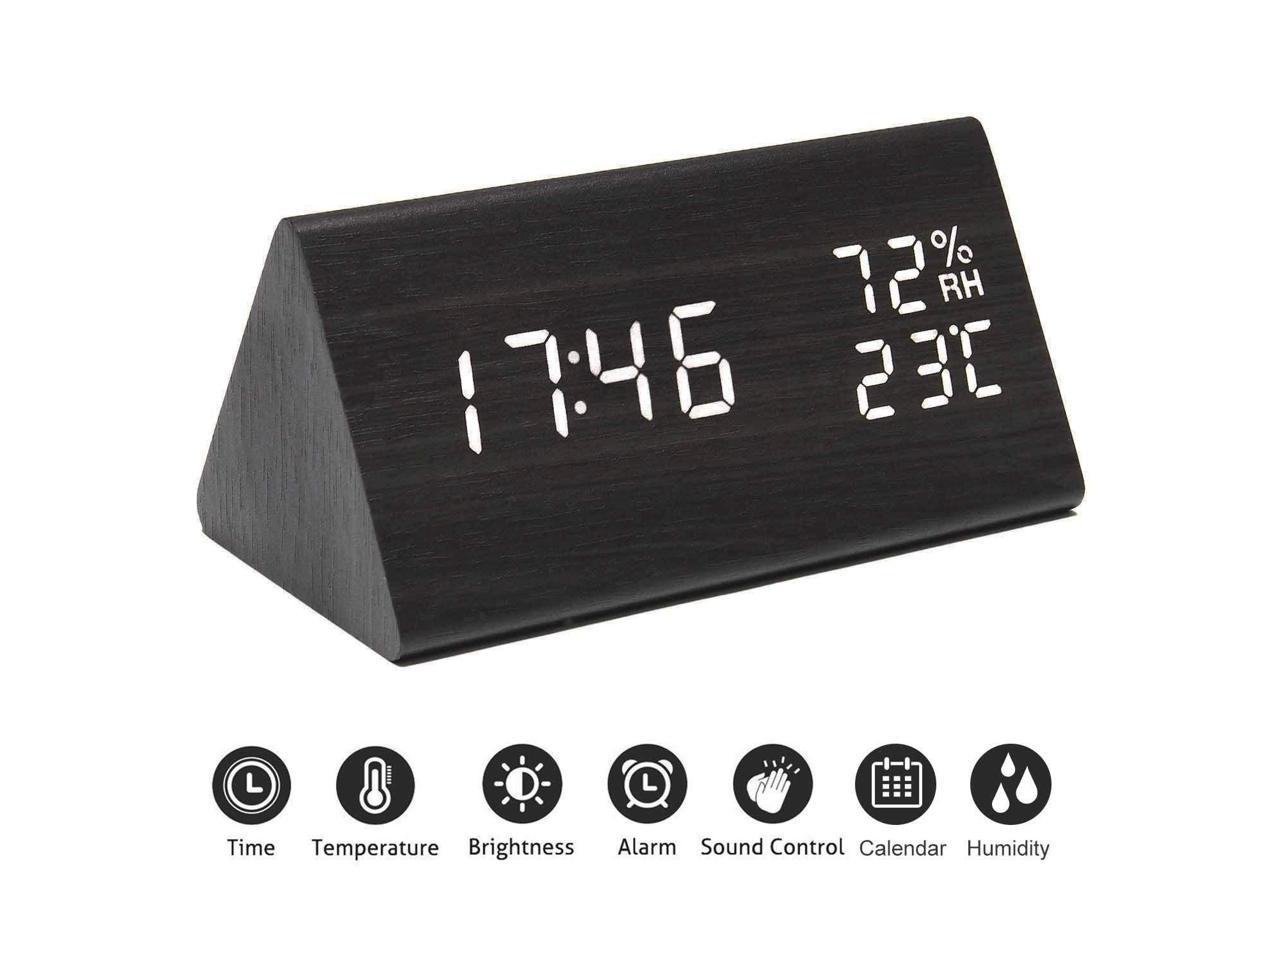 2 Modes Display Queta LED Digital Alarm Clock Wooden-like Small Table Clock with Date Temperature Display 3 Adjustable Brightness Voice Control bamboo